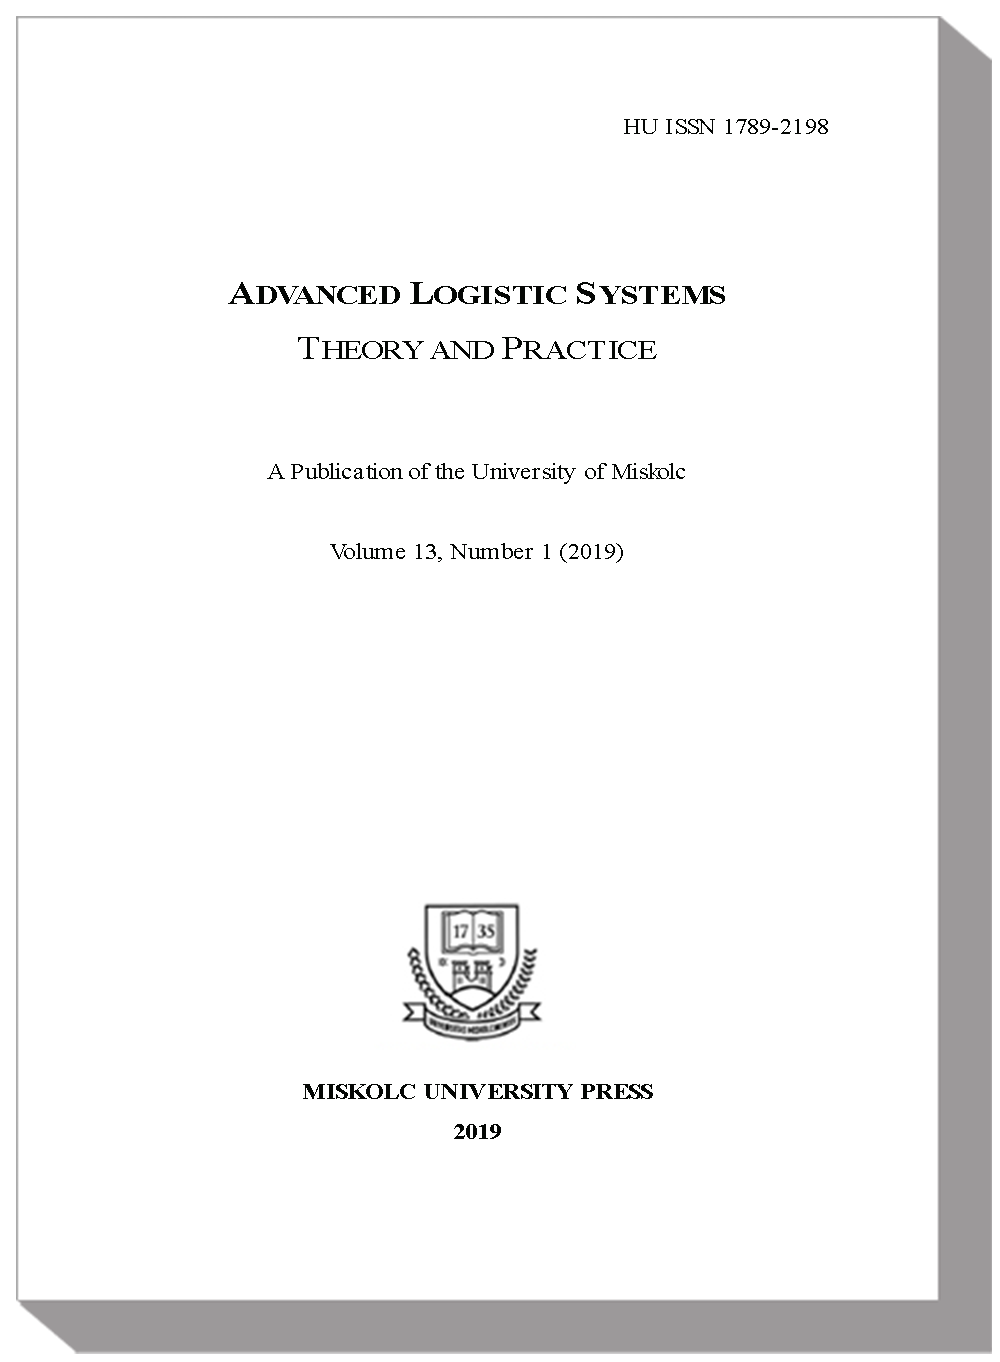 					View Vol. 13 No. 1 (2019): Advanced Logistic Systems - Theory and Practice
				